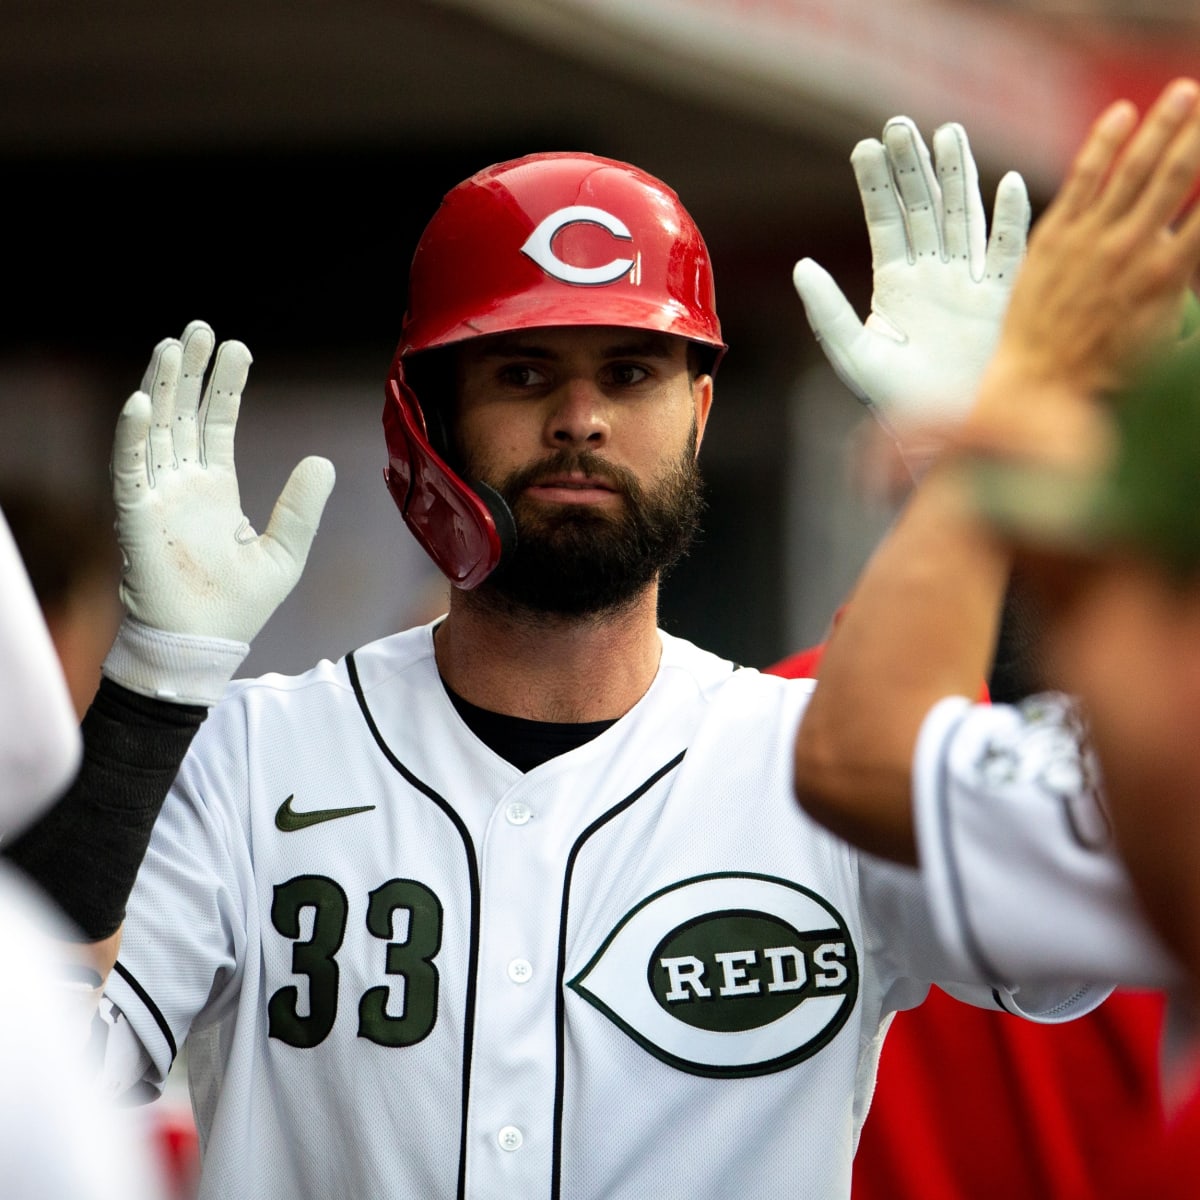 All-Star OF Jesse Winker could return to Reds on Friday